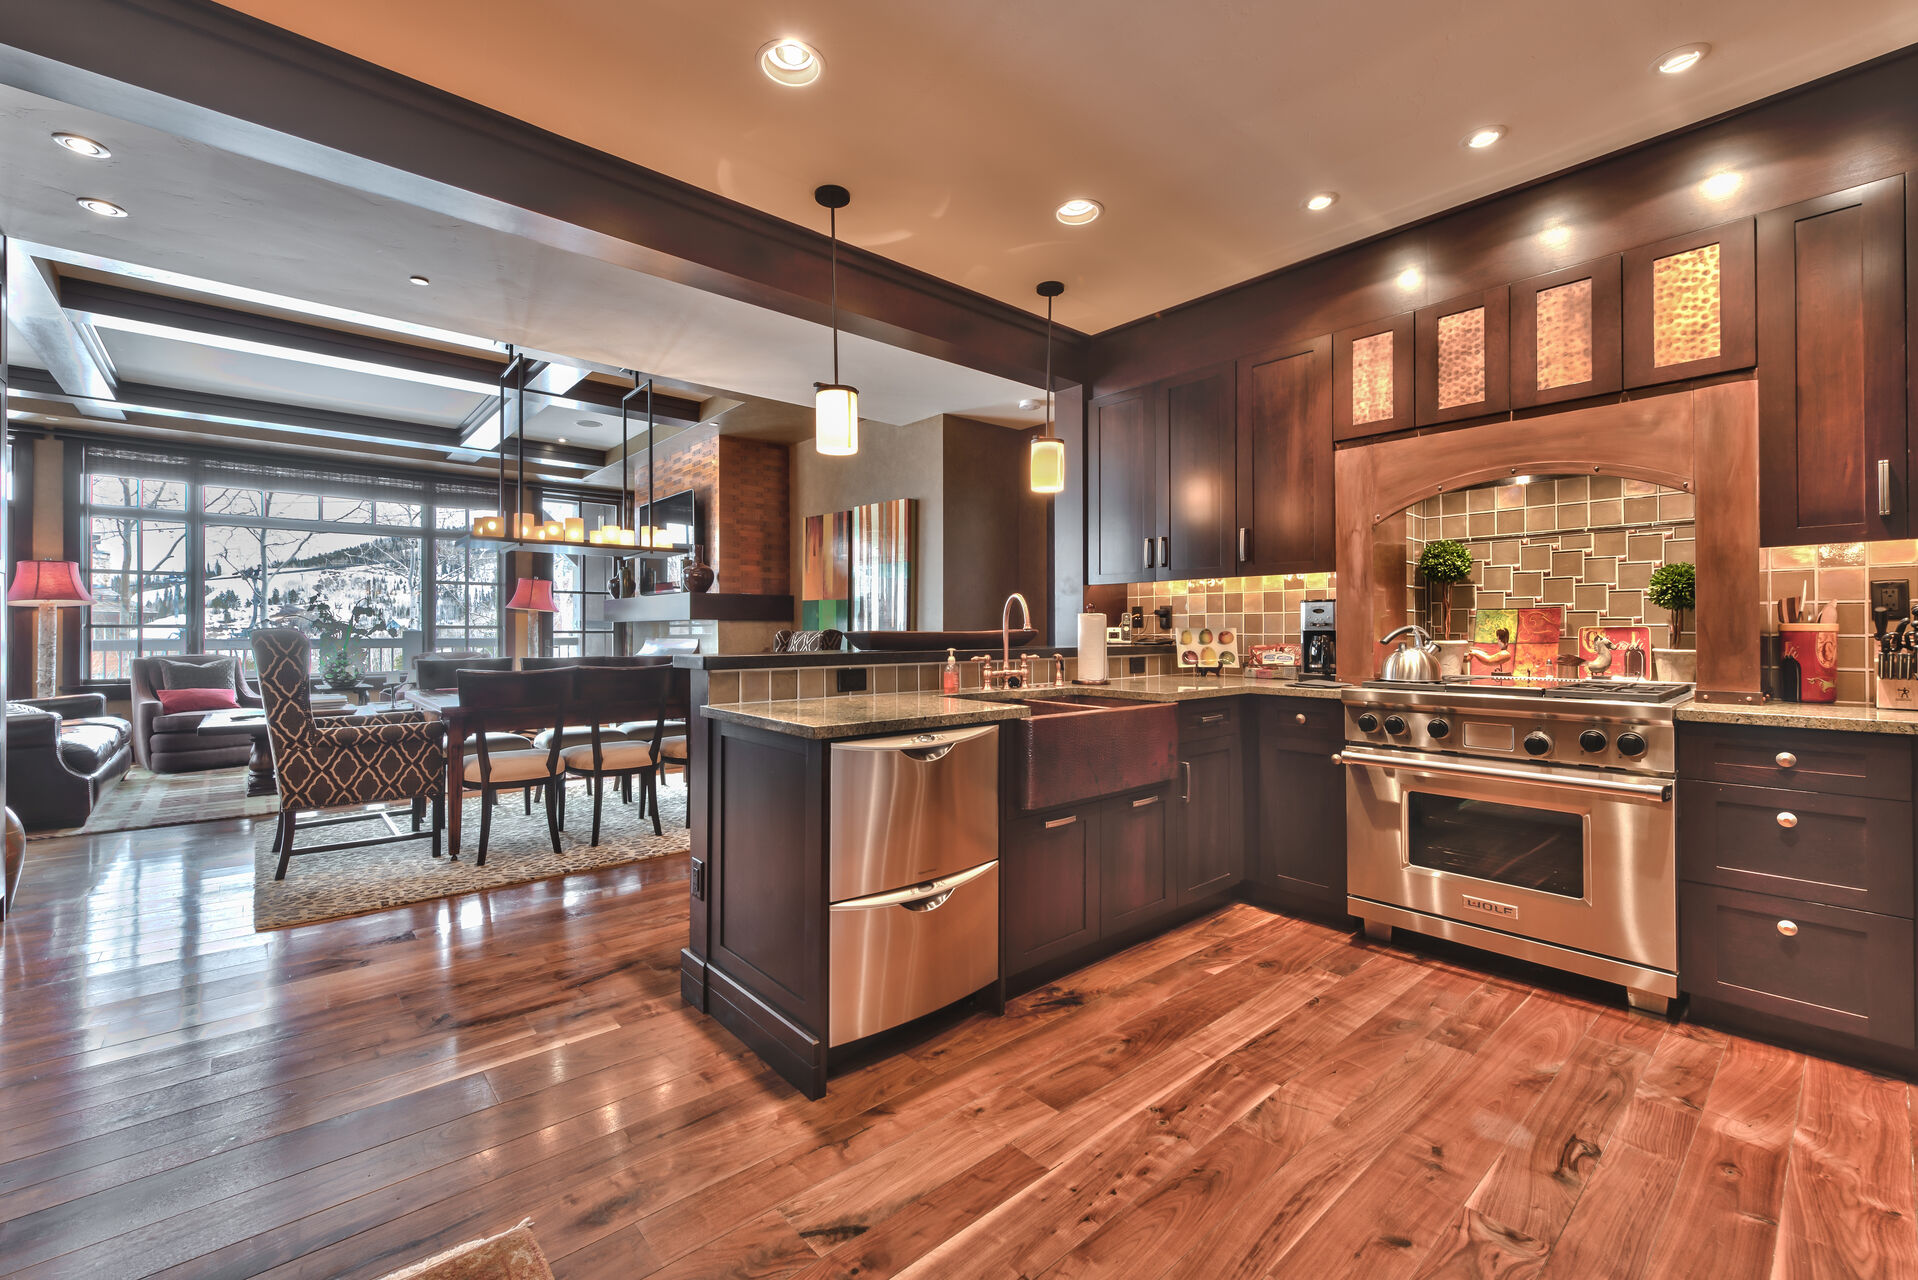 The Kitchen, Dining Space, and Living Area in One of Our Deer Valley, Utah Rentals.